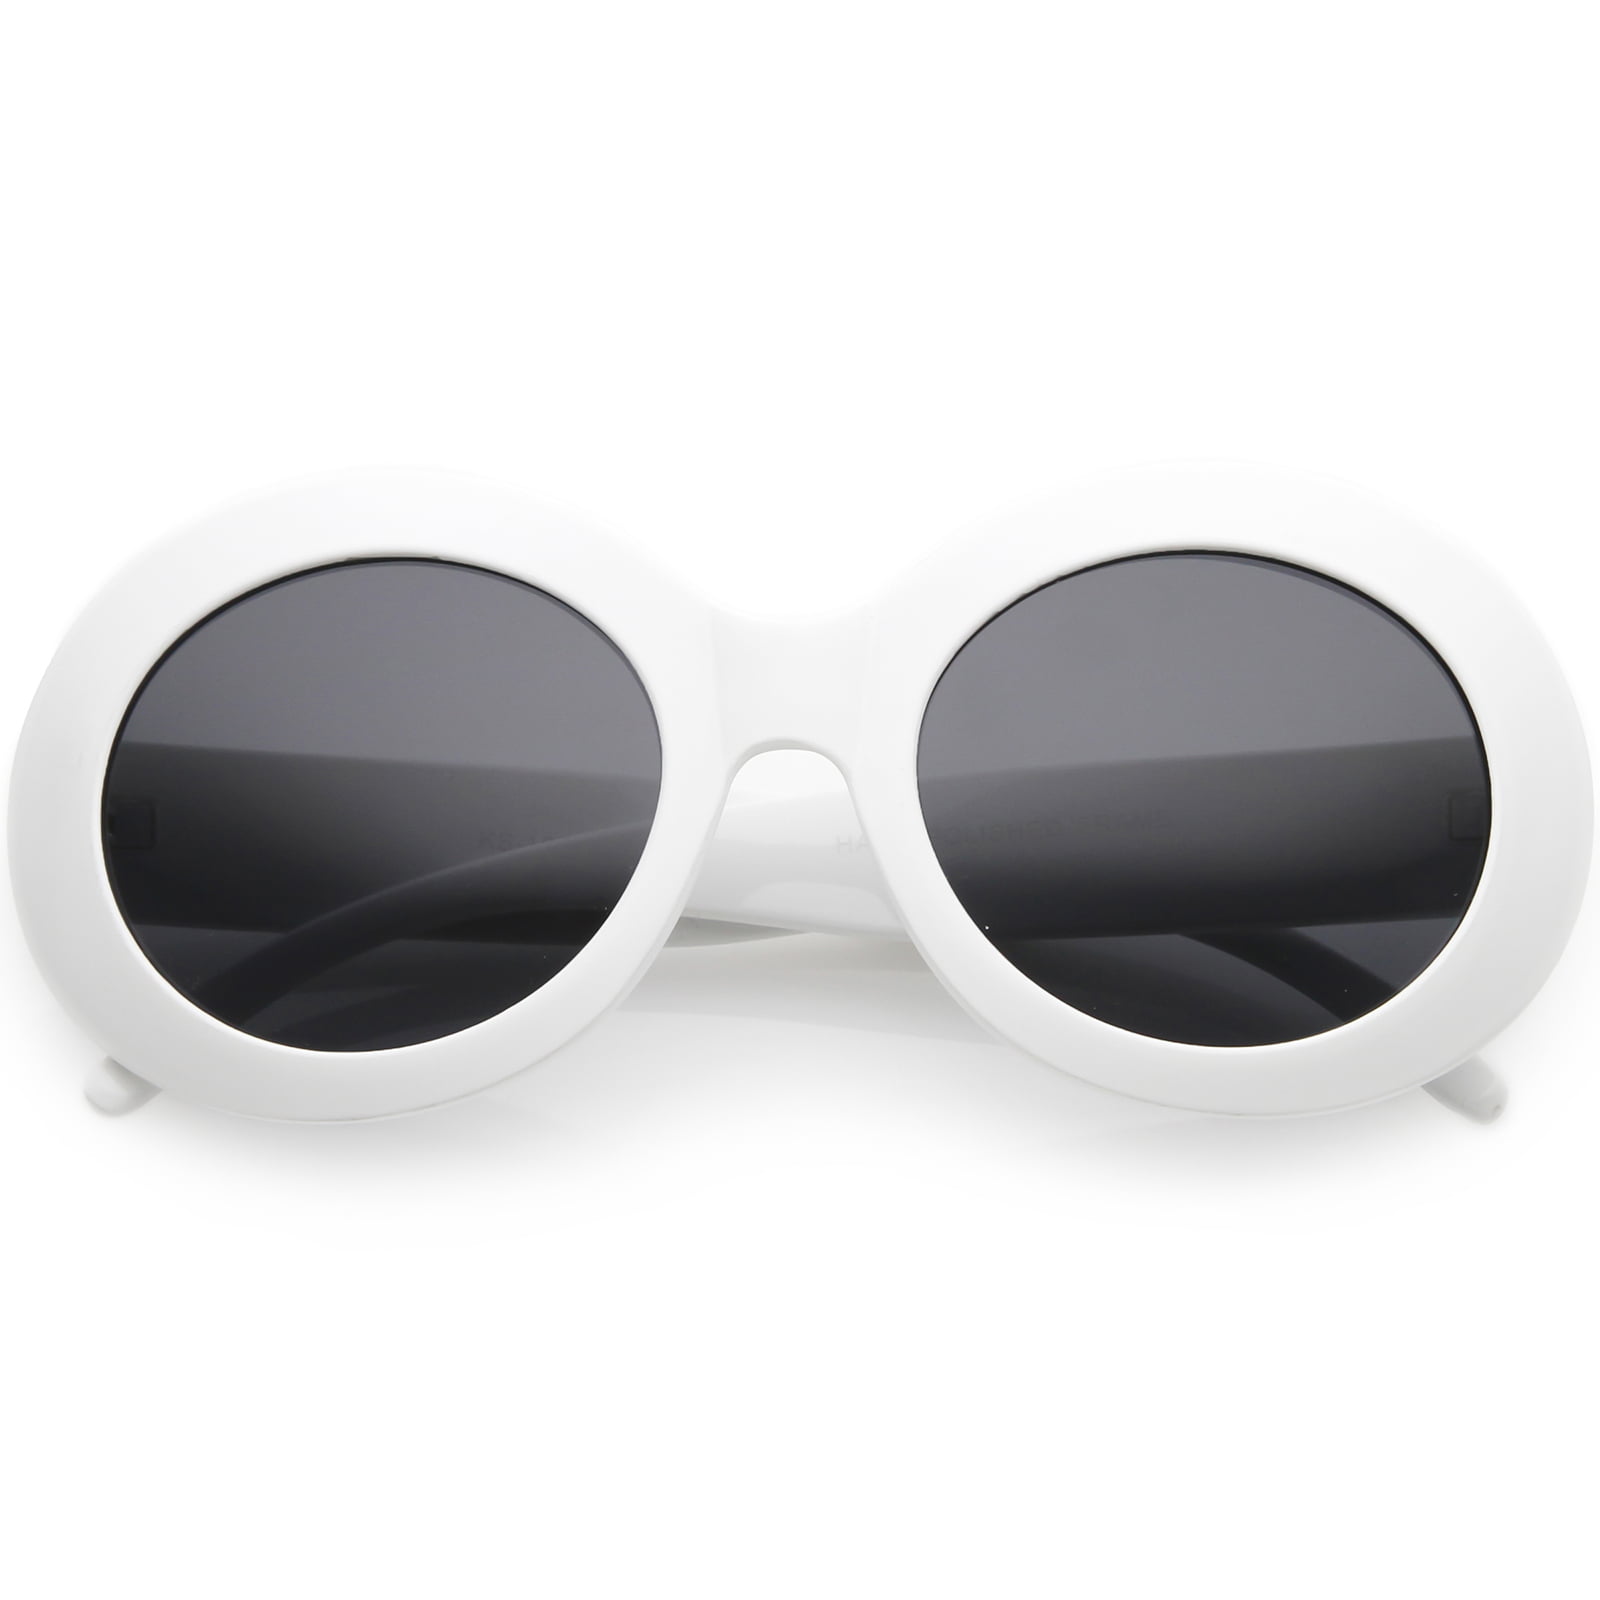 Sunglassla Large Oversize Chunky Oval Sunglasses Wide Arms Neutral Colored Lens 55mm White 